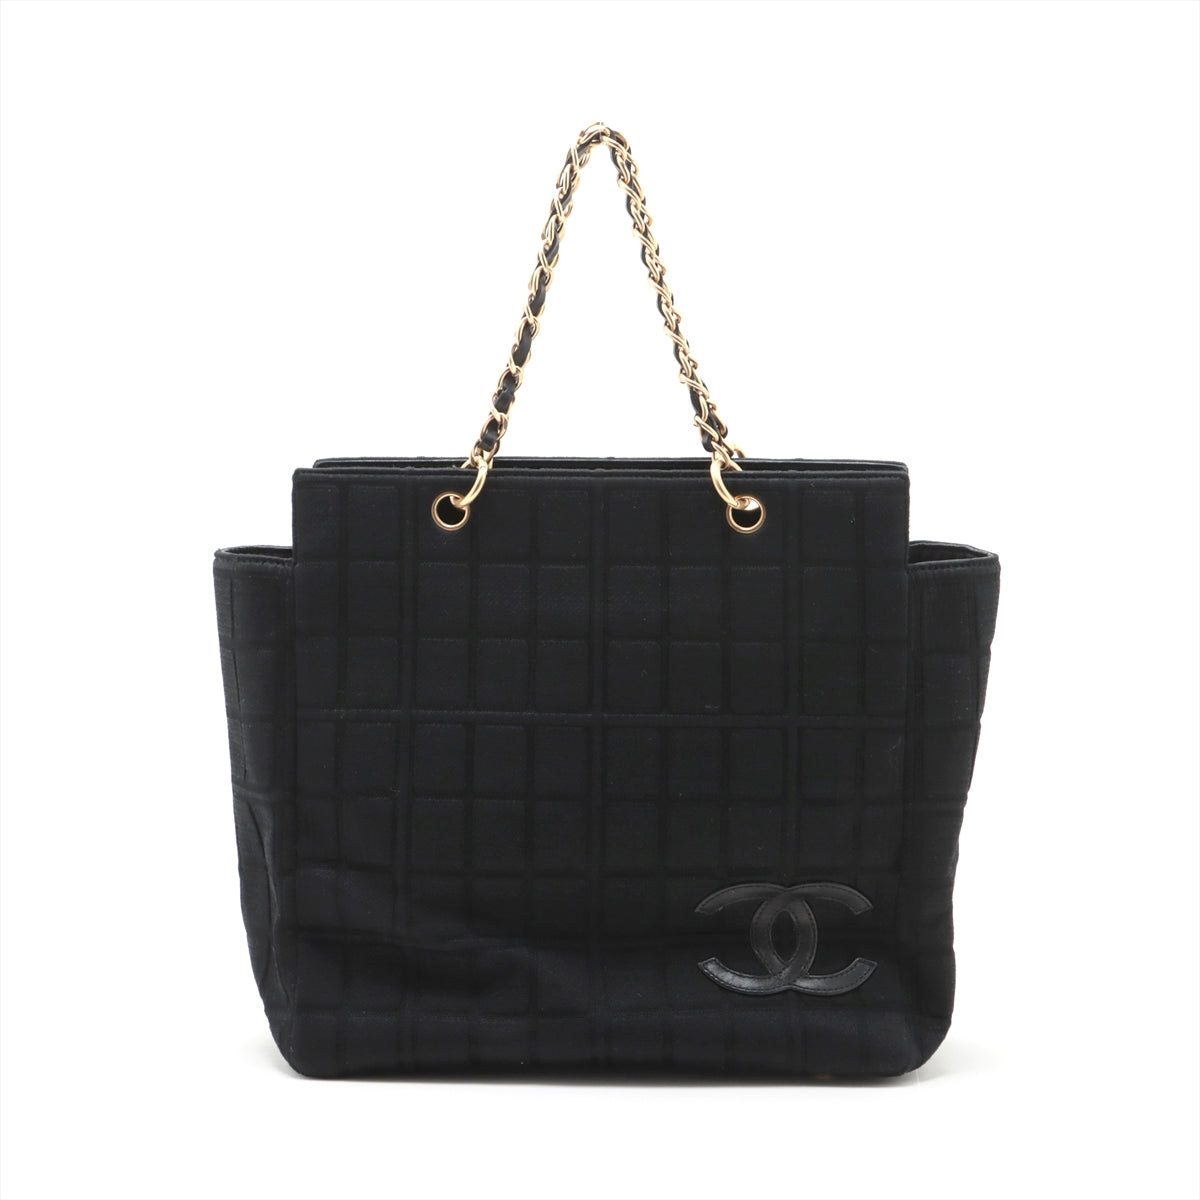 Chanel Chocolate Bar Cotton Chain tote bag Black Gold Metal fittings 6XXXXXX